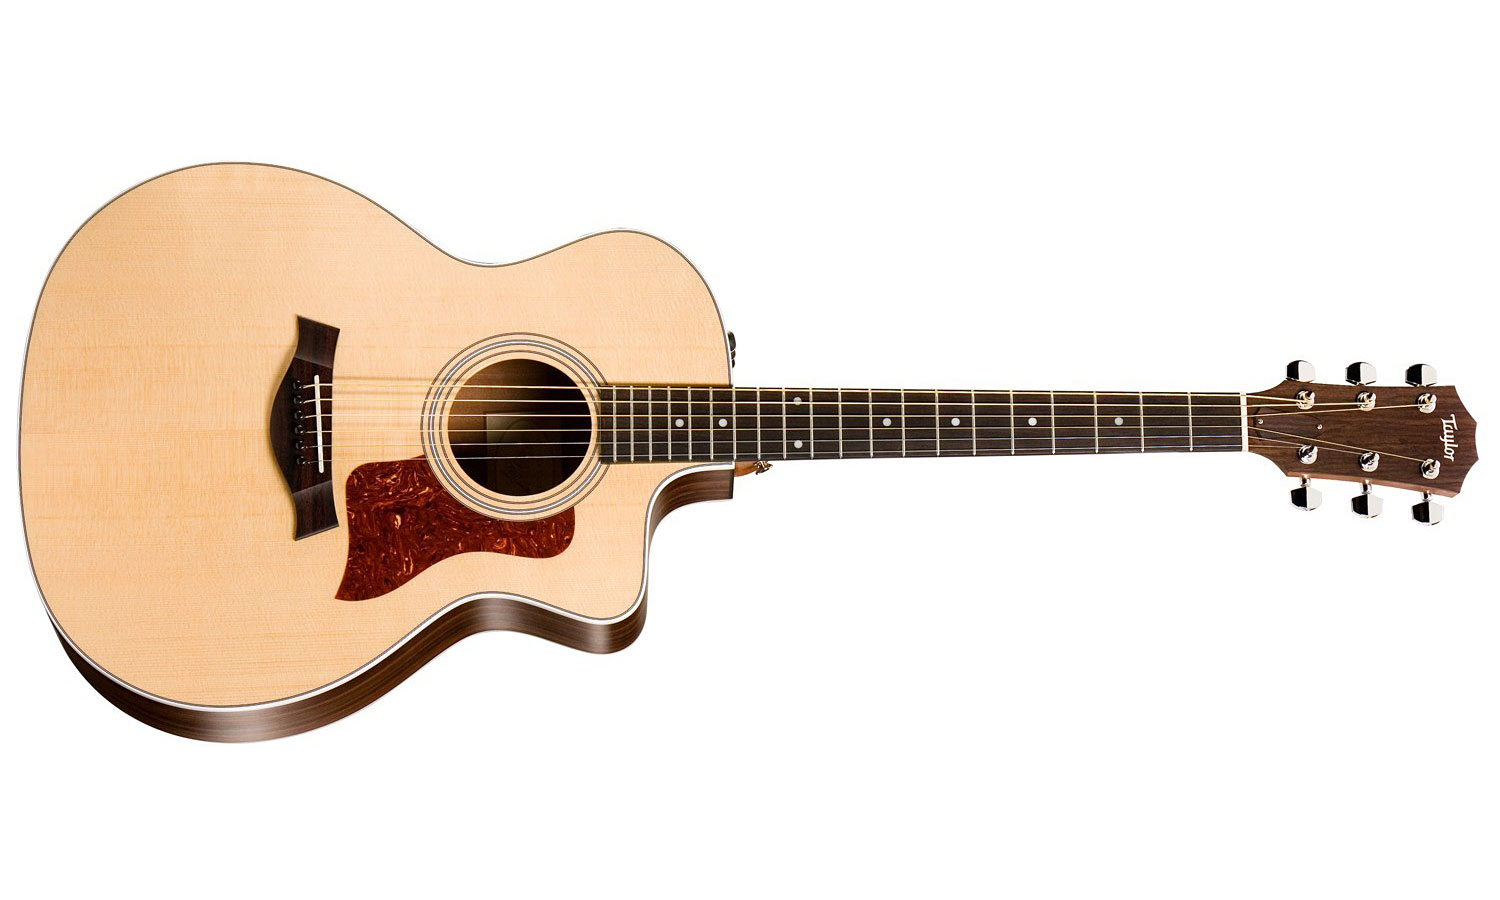 Taylor 214ce Grand Auditorium Natural Gloss Top - Westerngitarre & electro - Variation 1